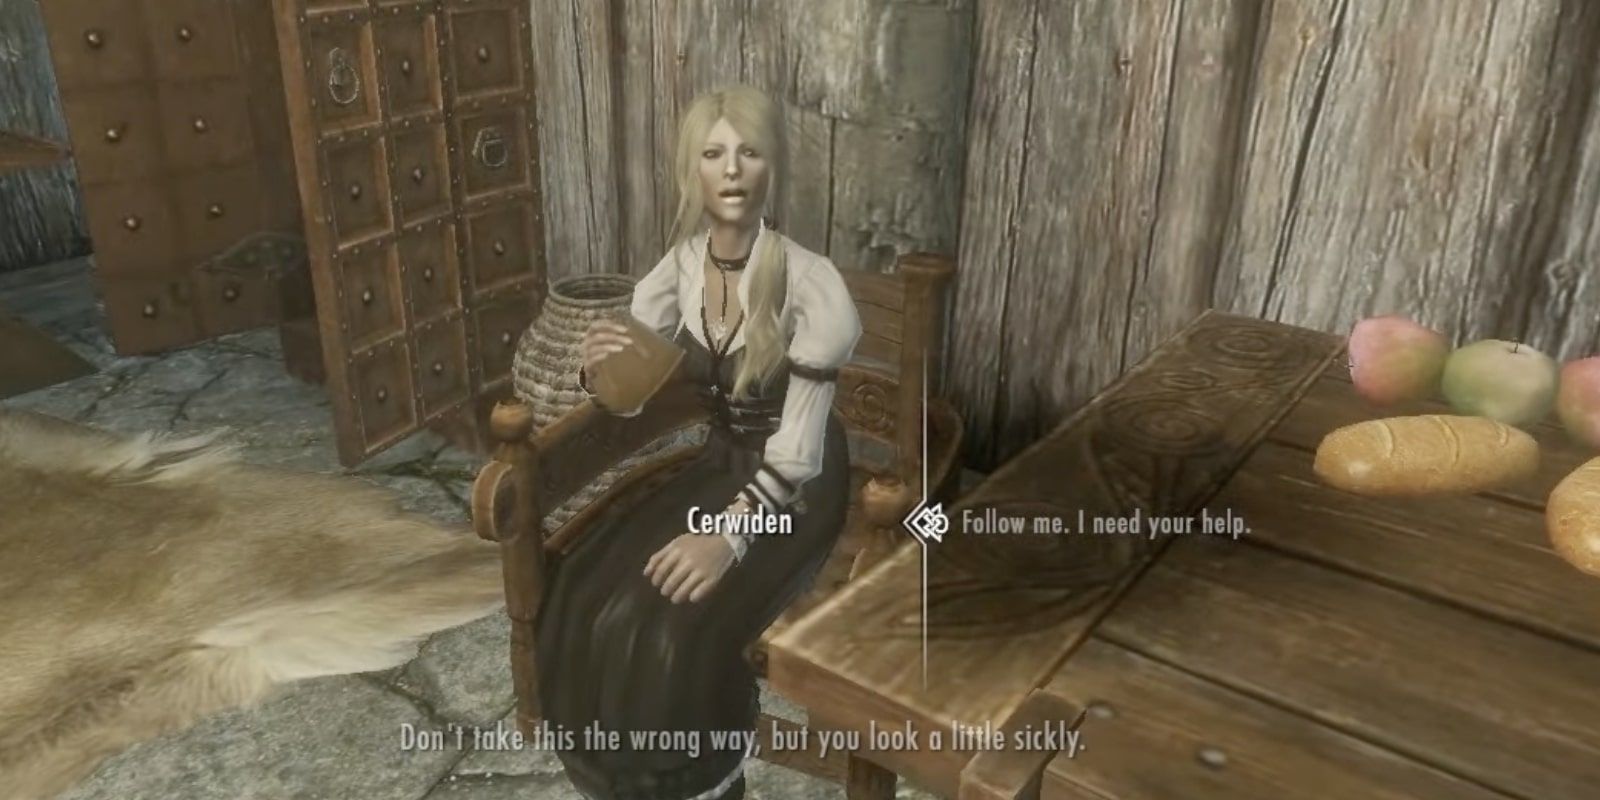 Cerwiden sits in a chair as she is asked for help